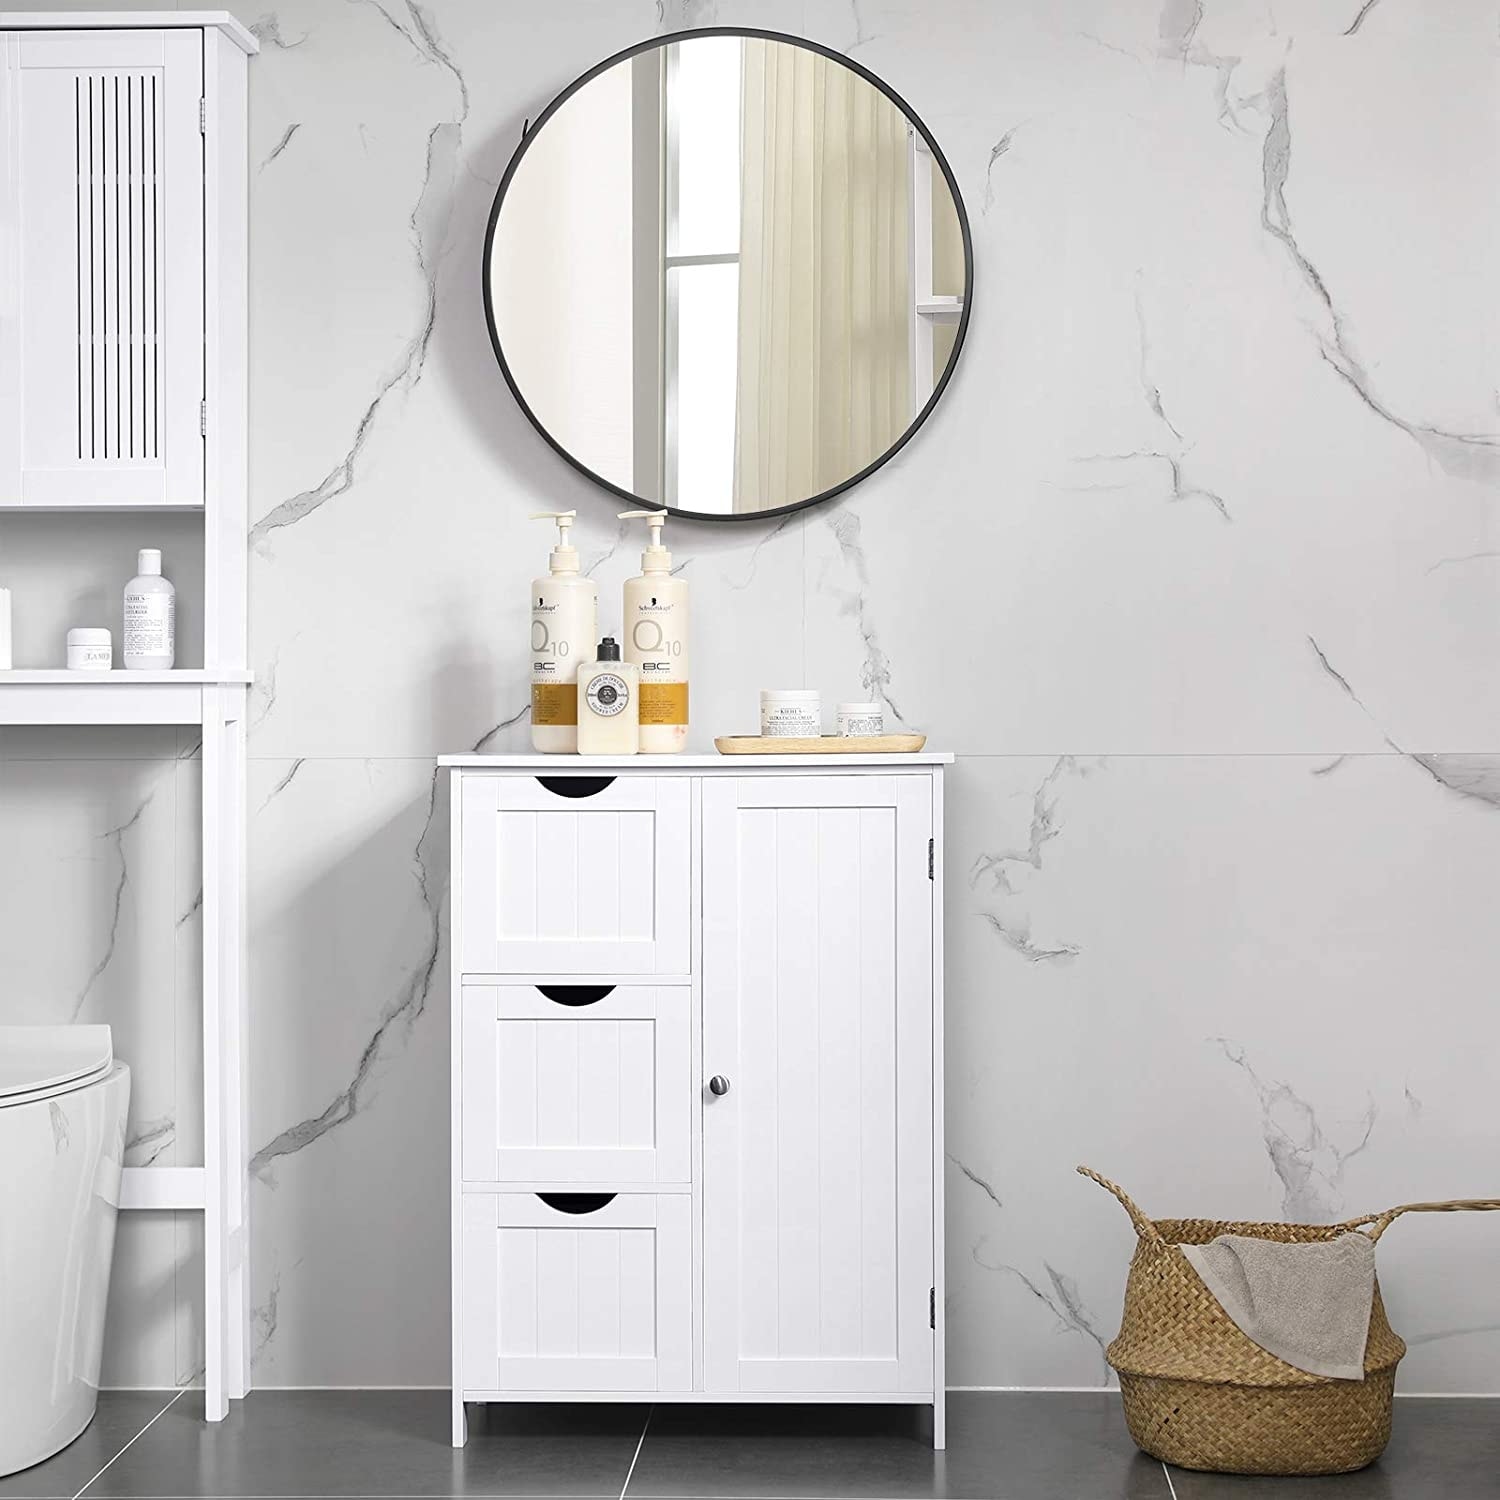 https://ak1.ostkcdn.com/images/products/is/images/direct/7cedc9d9e23d609b4fe800289d434806785cadf7/Bathroom-Storage-Cabinet%2C-White-Floor-Cabinet-with-3-Large-Drawers-and-1-Adjustable-Shelf.jpg